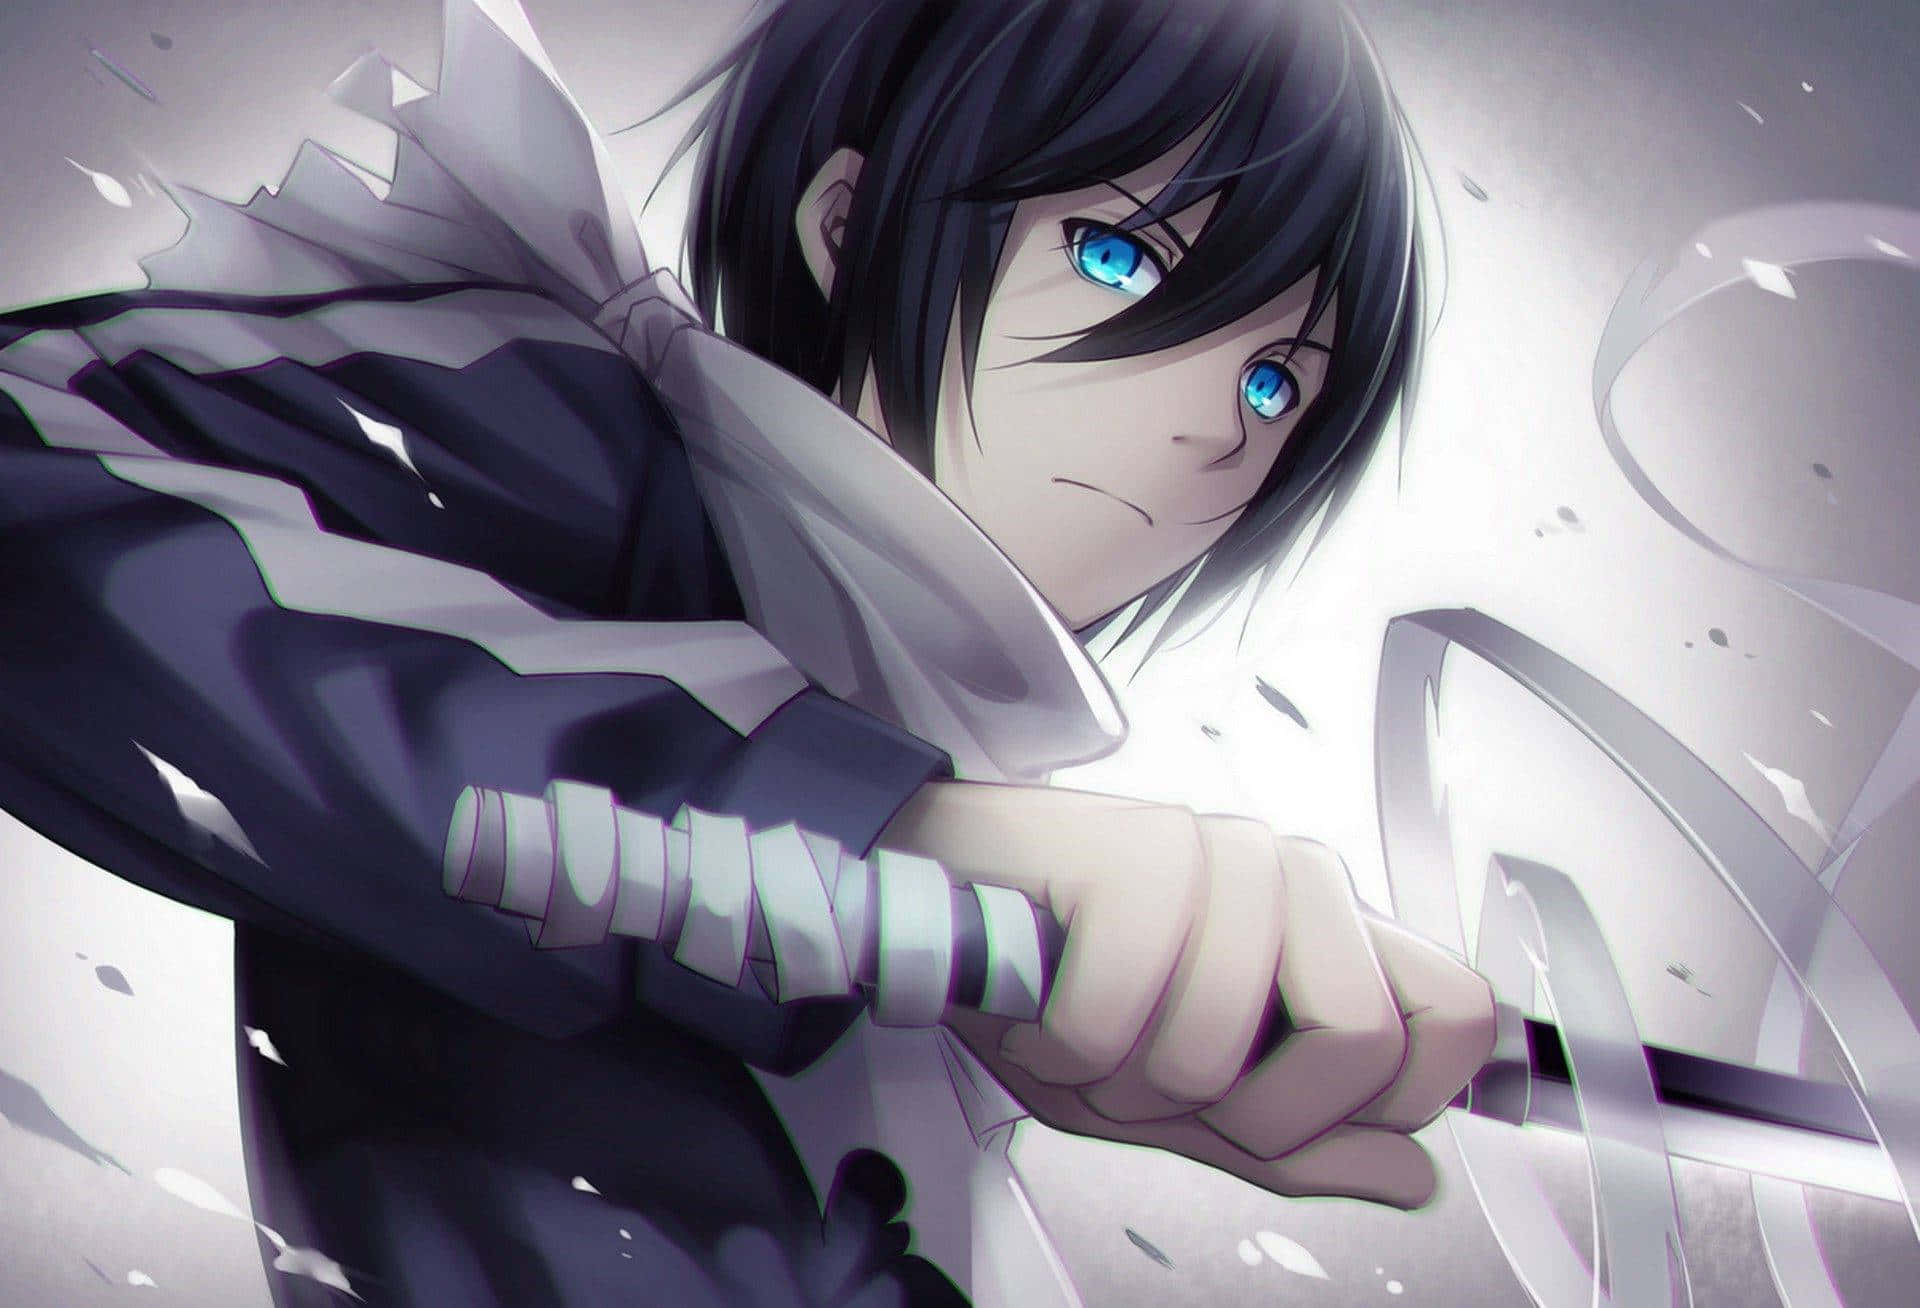 "Yato, a God of Fortune, on His Quest."